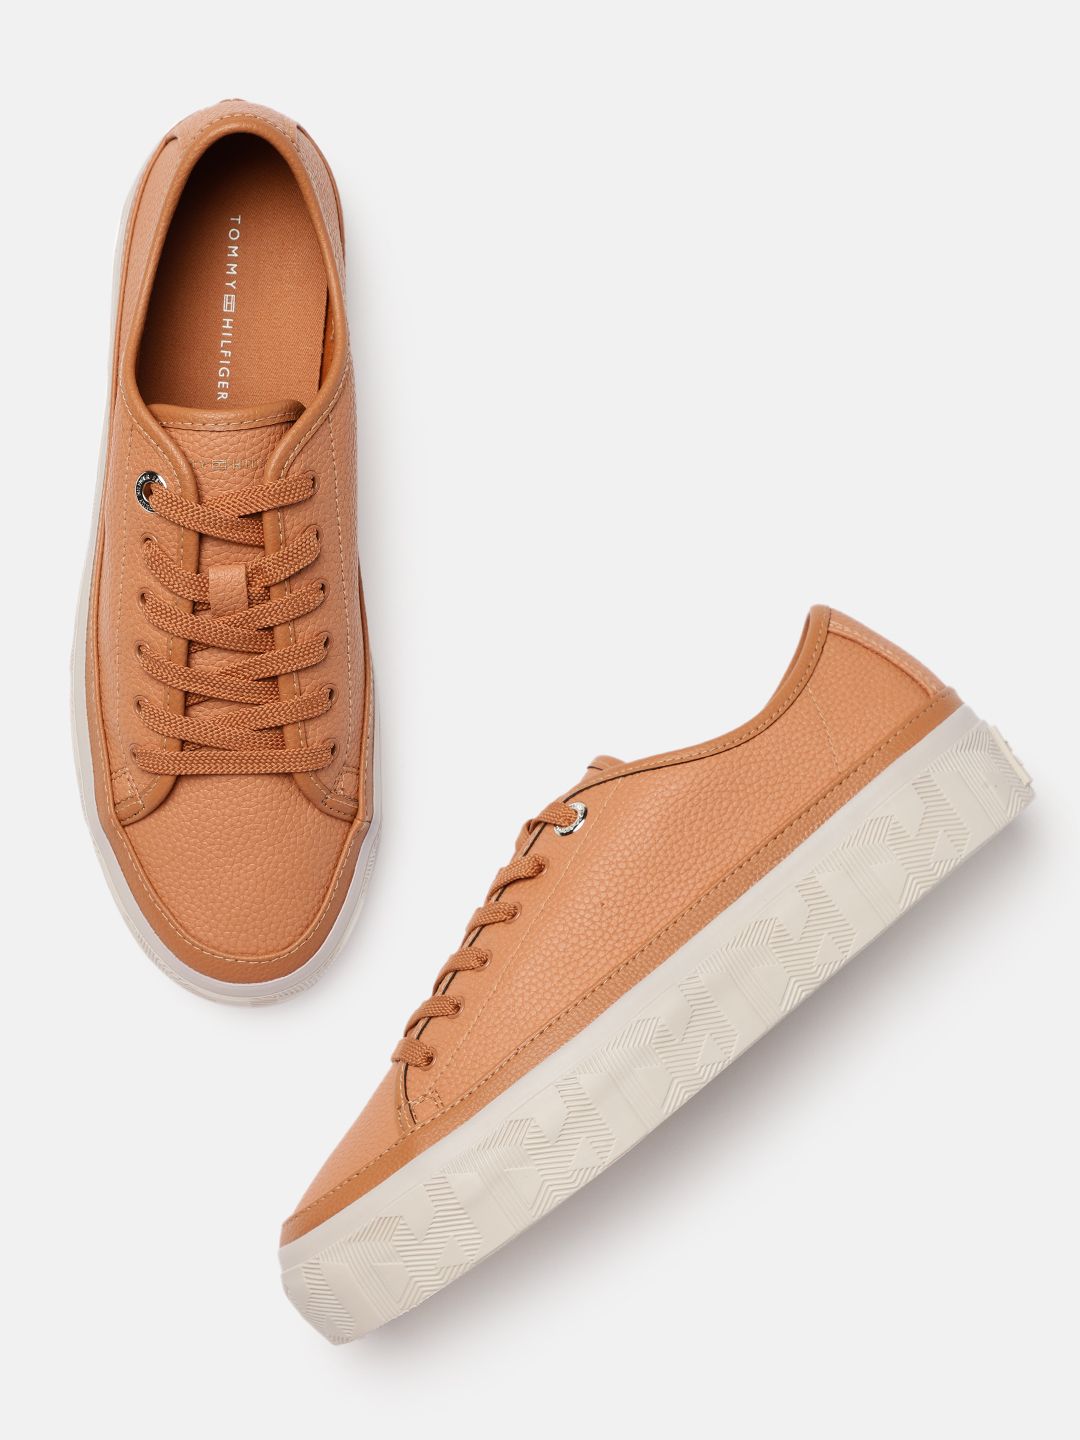 Tommy Hilfiger Women Tan Brown Textured Leather Regular Sneakers Price in India